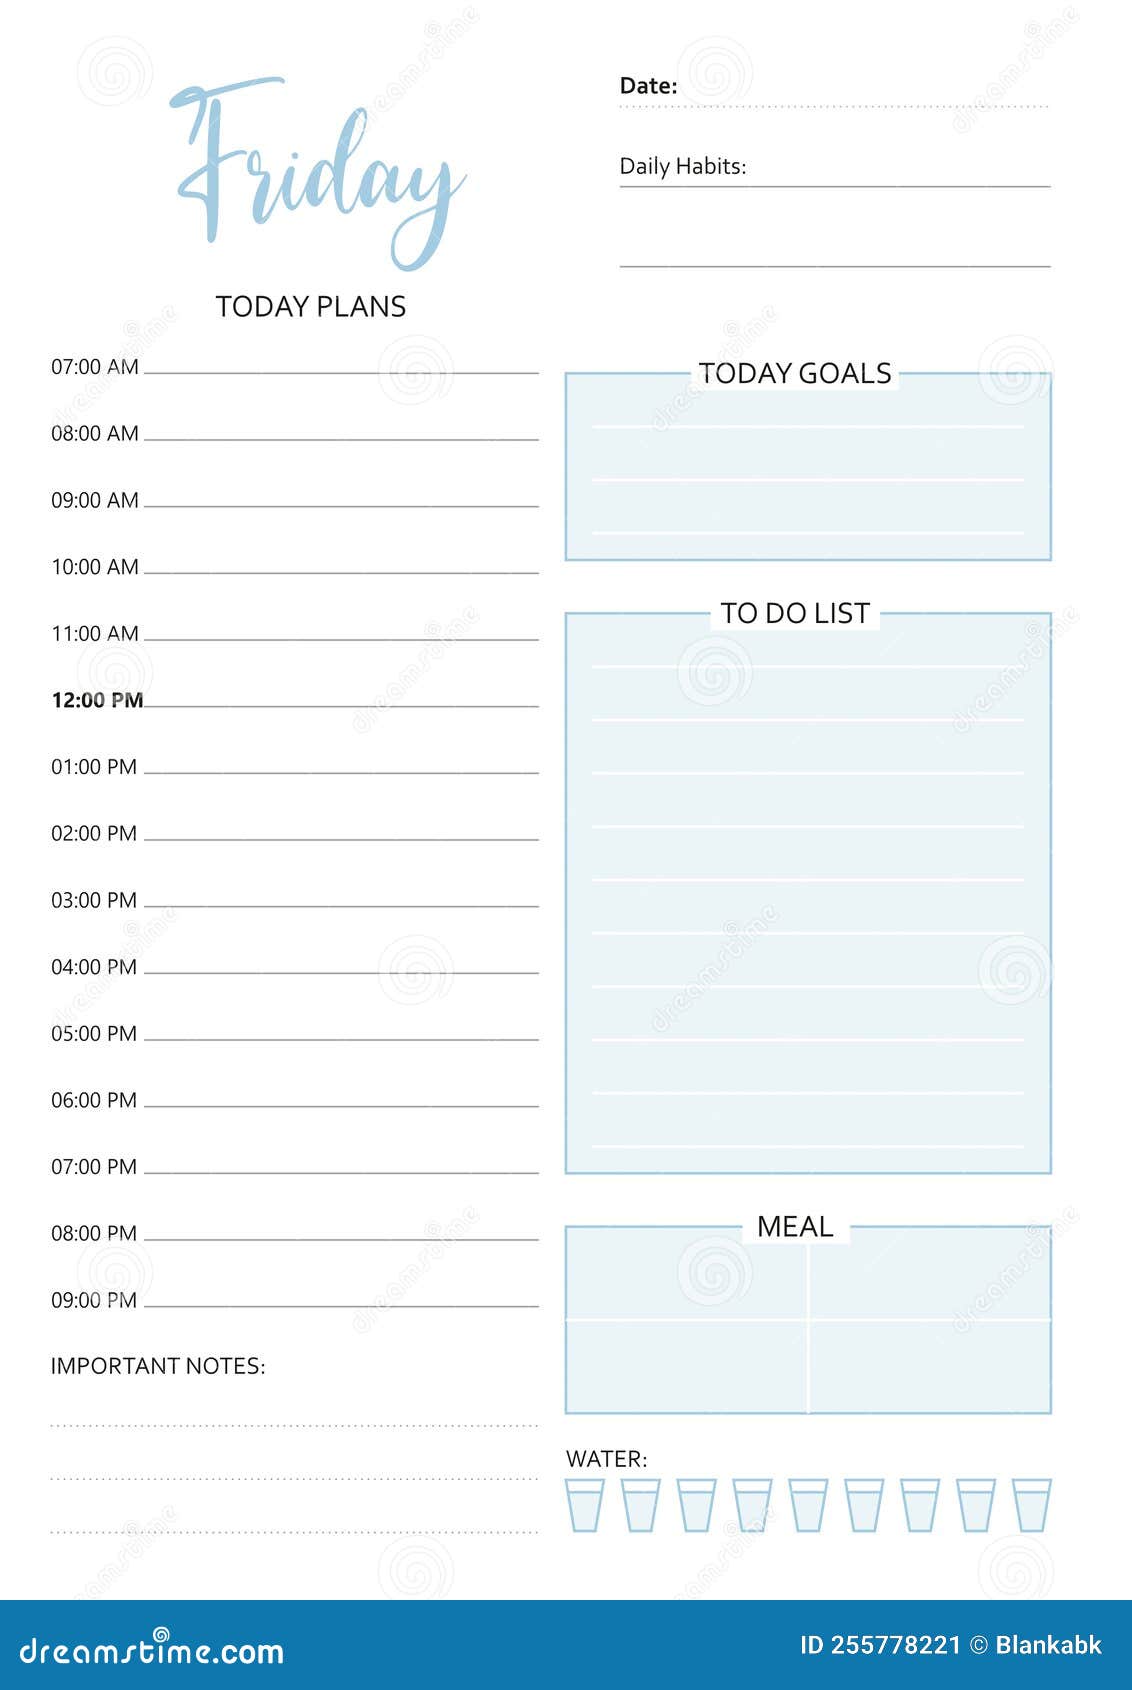 daily-planner-printable-everyday-planner-to-do-list-habit-tracer